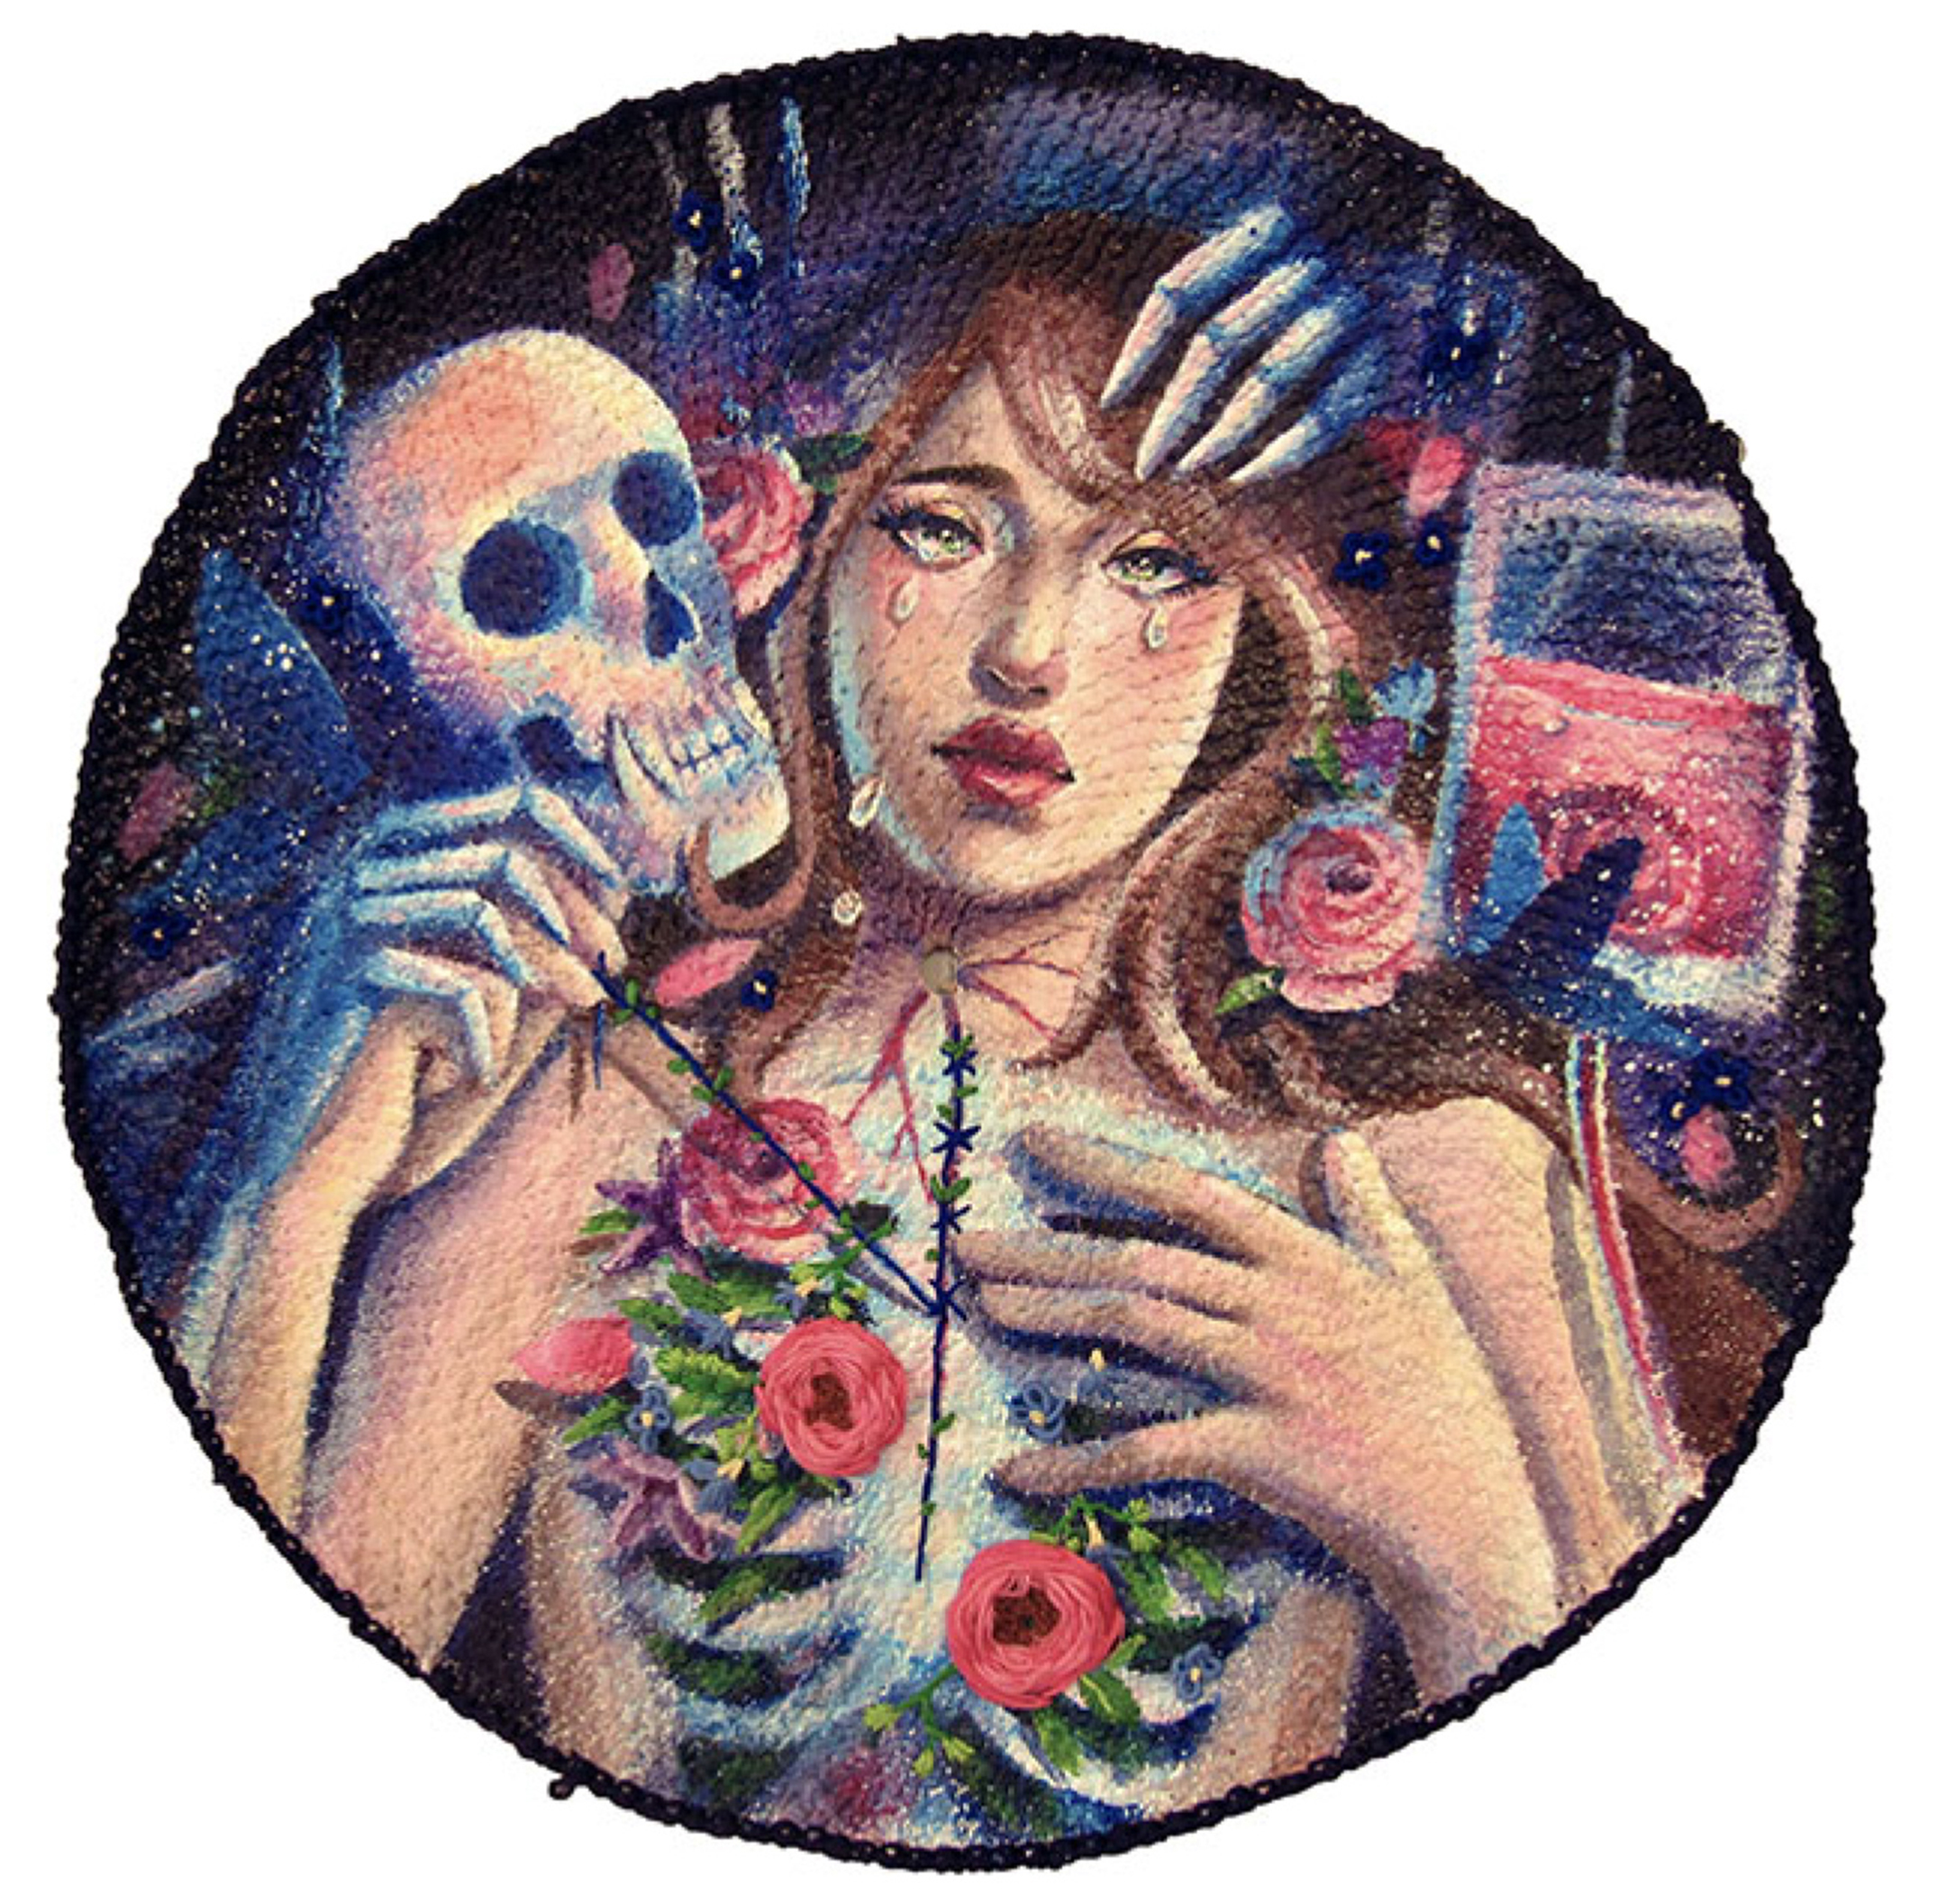 Round painting of a crying woman caressed by a skeleton